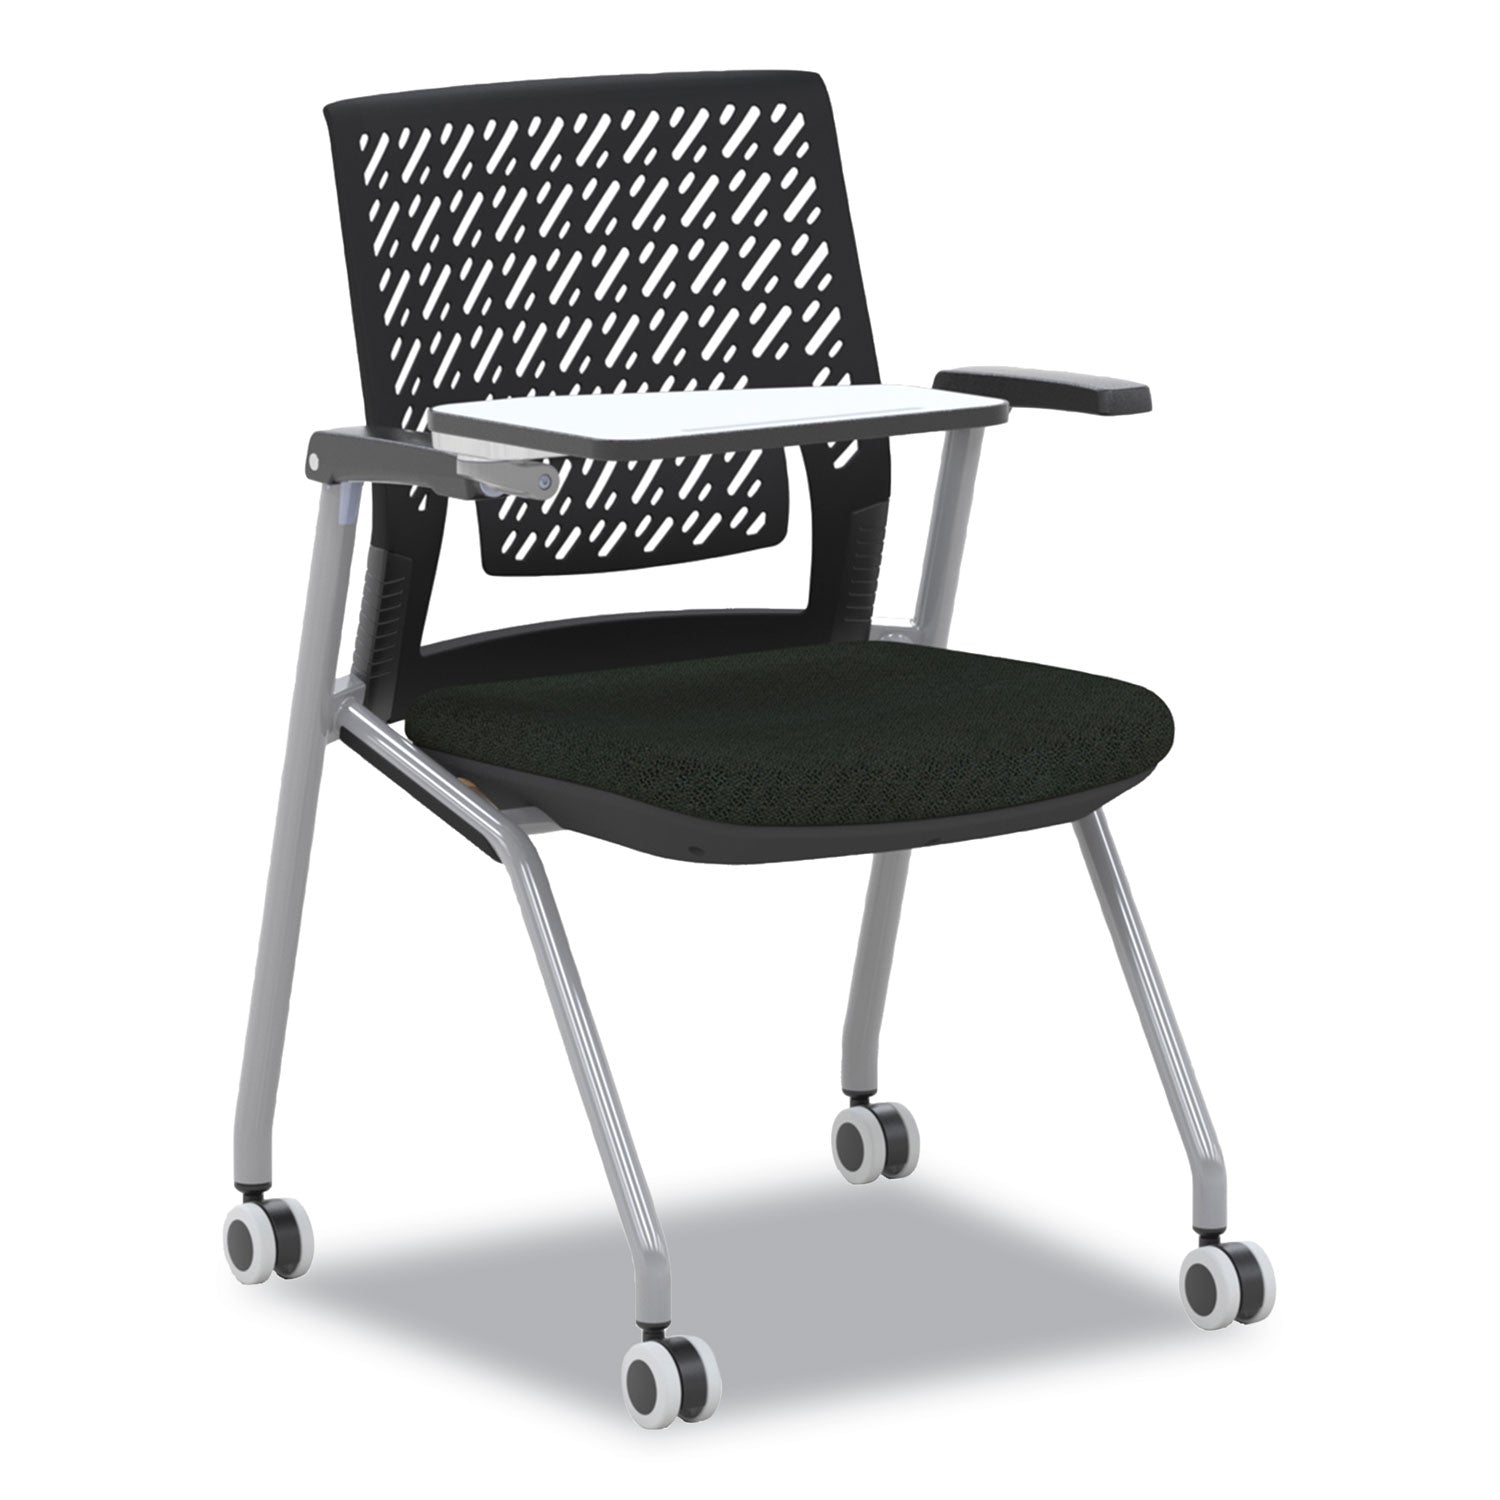 thesis-training-chair-w-flex-back-and-tablet-max-250-lb-18-high-black-seat-gray-base-2-cartonships-in-1-3-business-days_safktx3sbblk - 1